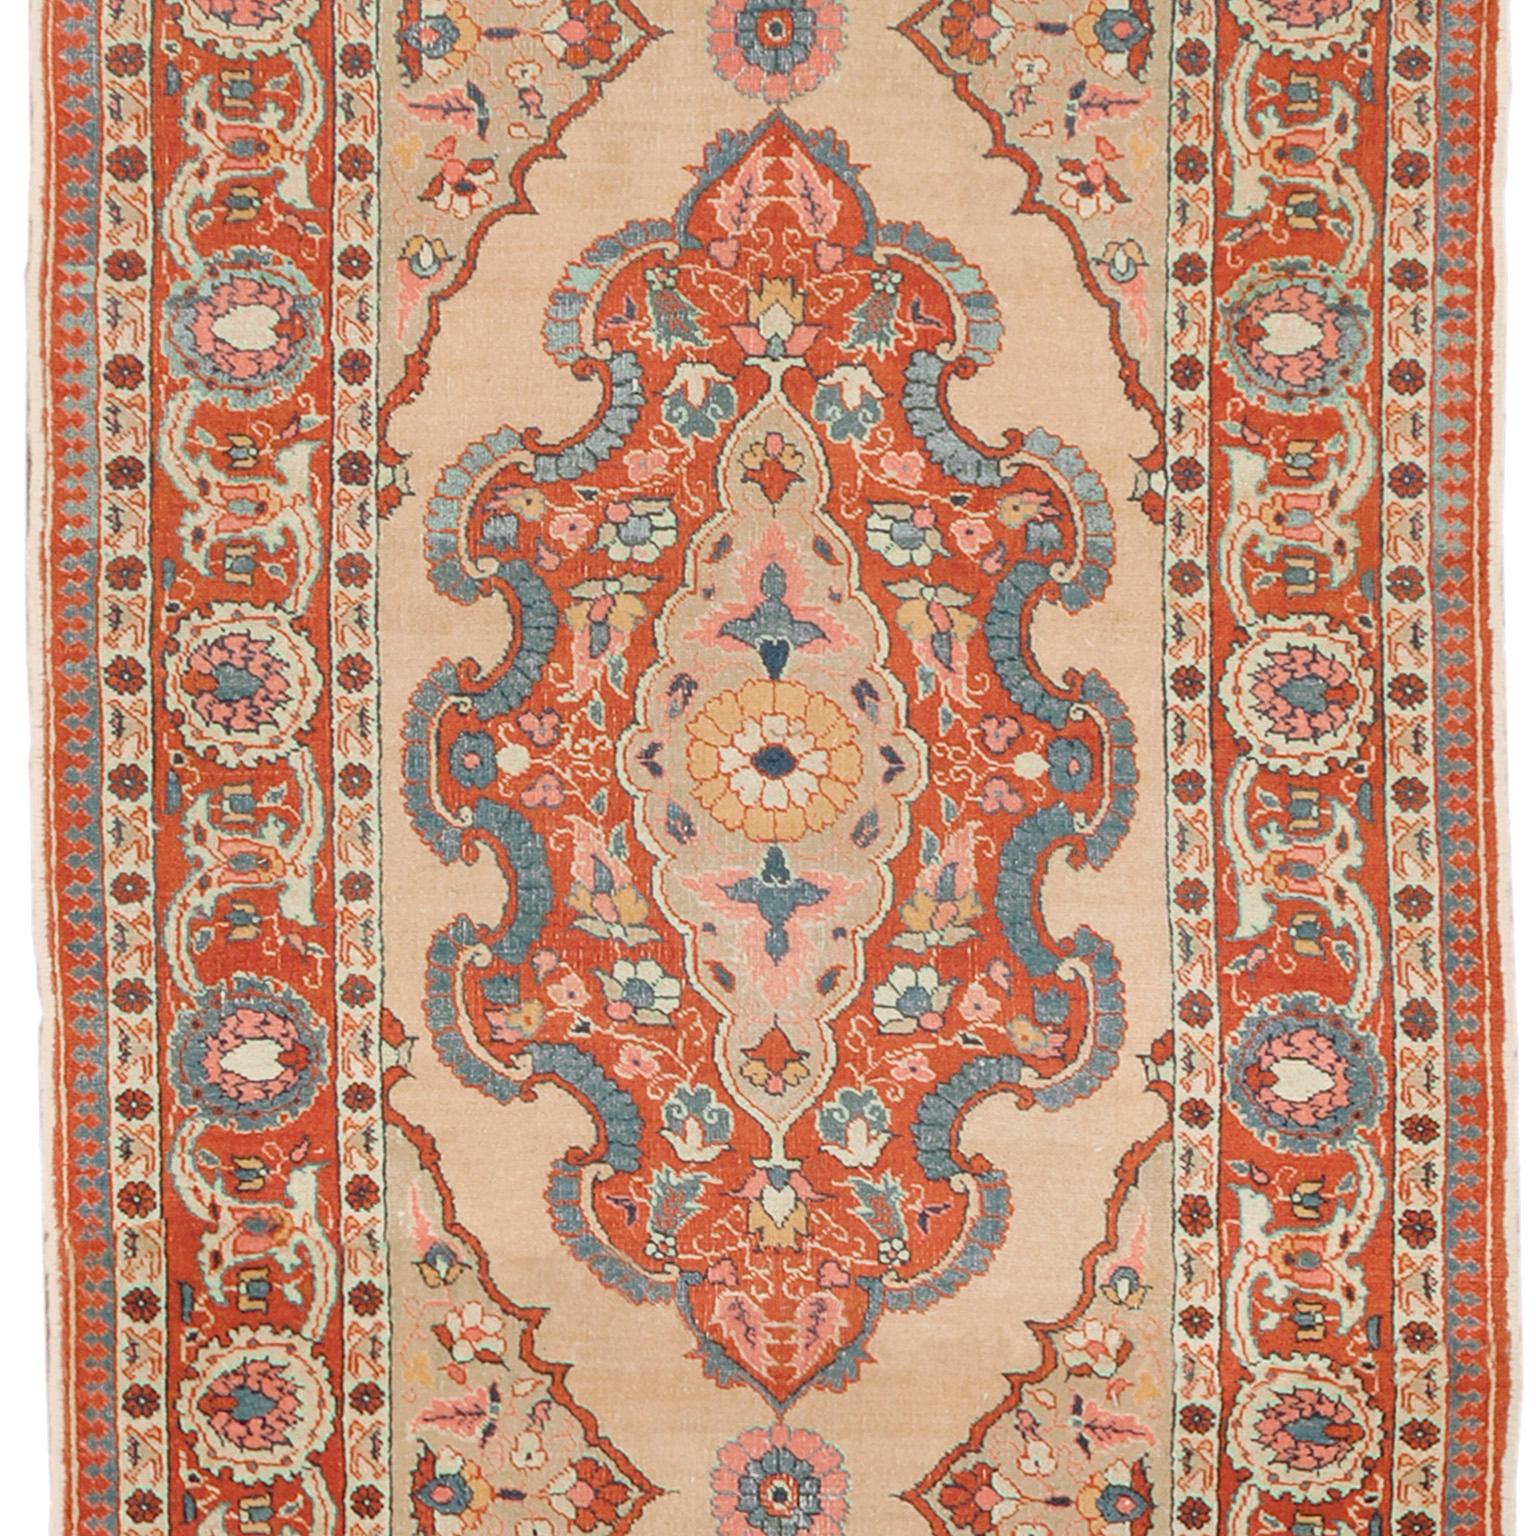 Early 20th Century Persian Tabriz Runner In Good Condition For Sale In New York, NY